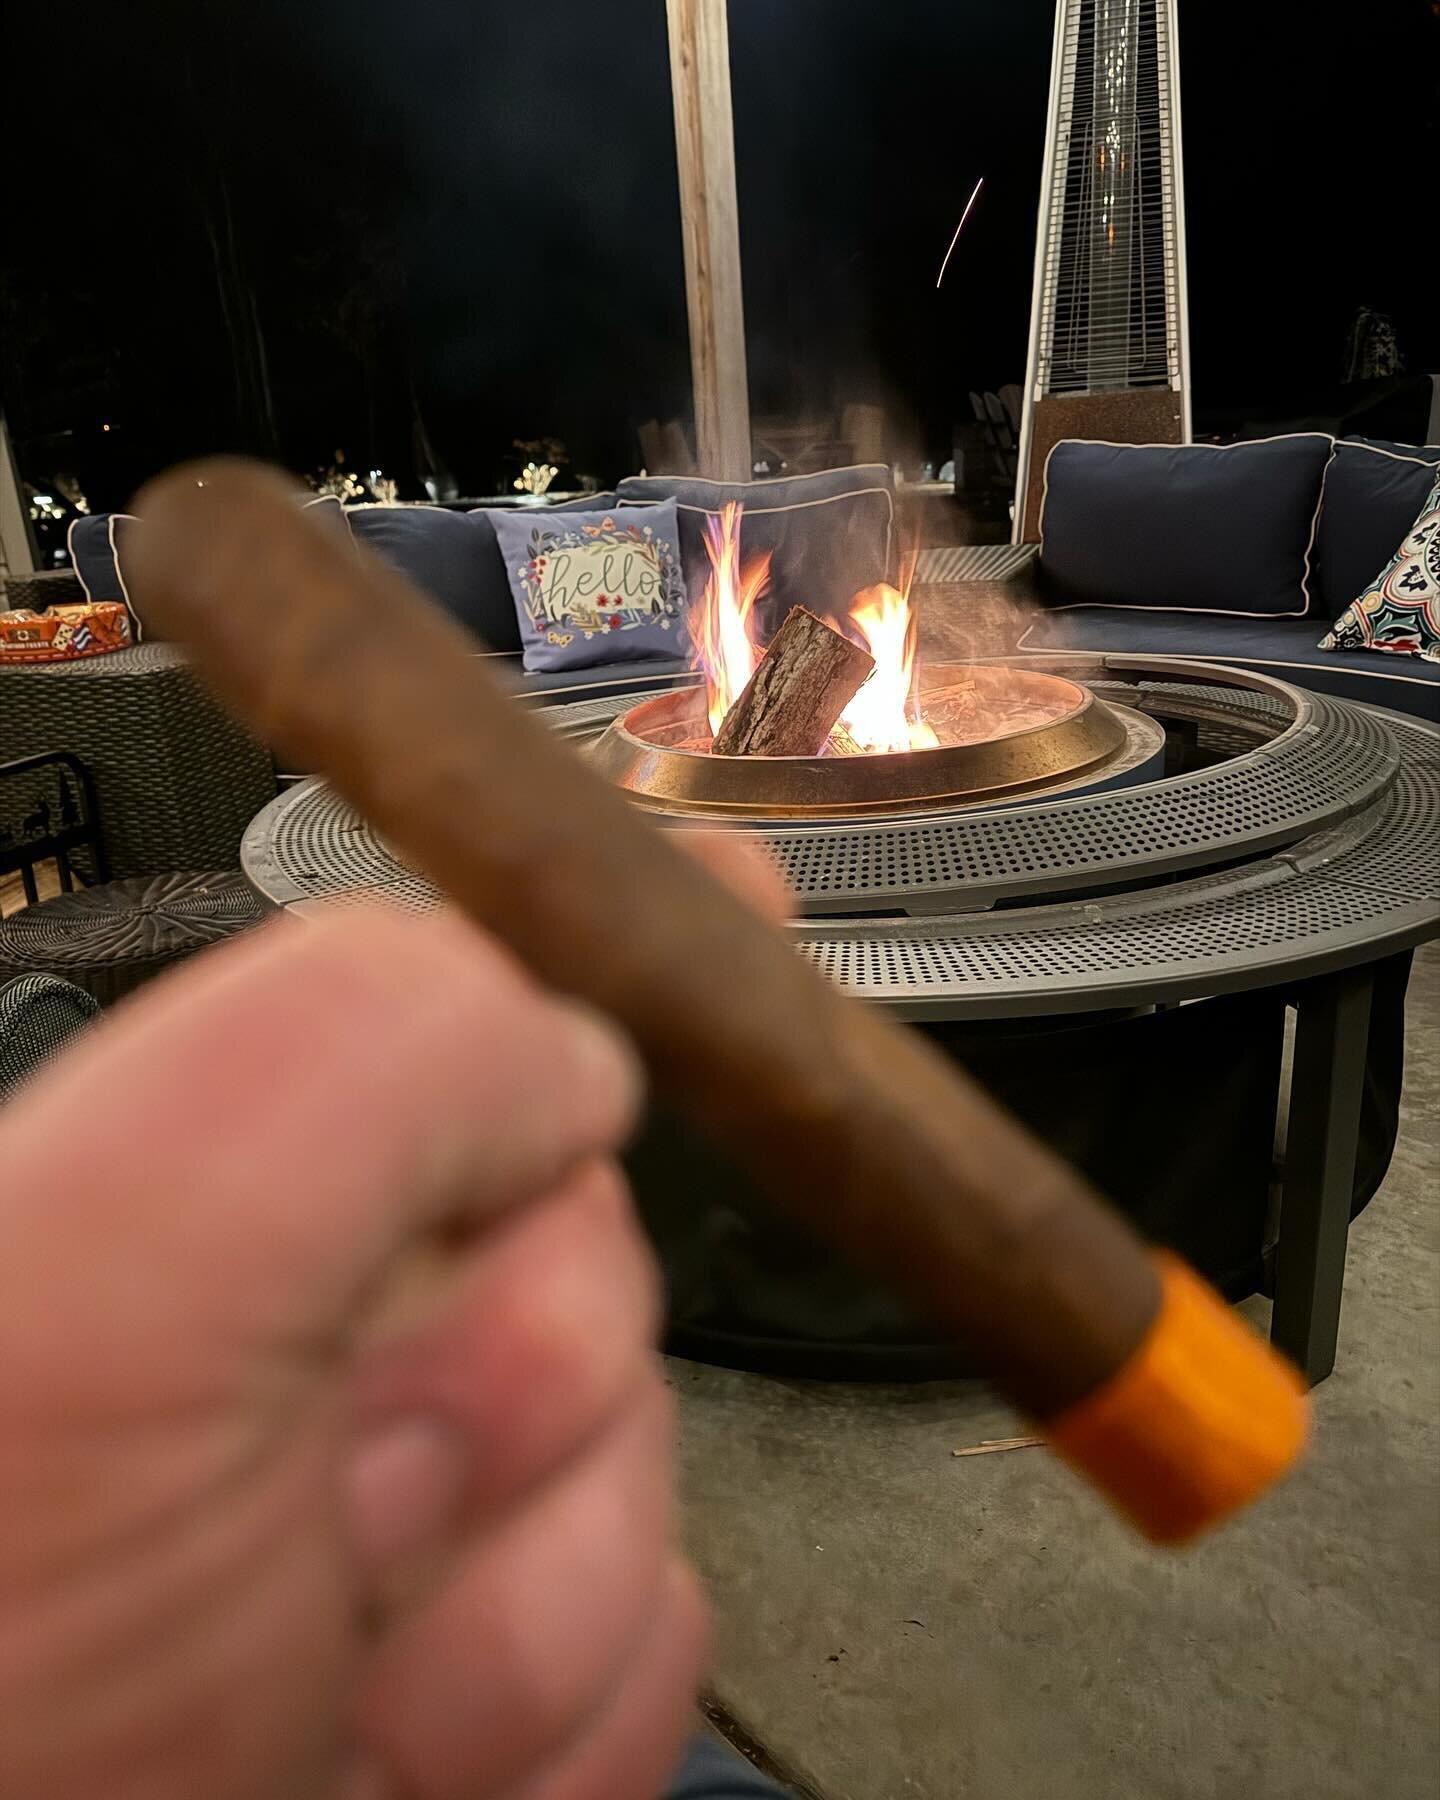 A Tennessee waltz around the fire!
Who&rsquo;s down to dance?
@dannyhennessy @migsch1980 @thecrownedheads